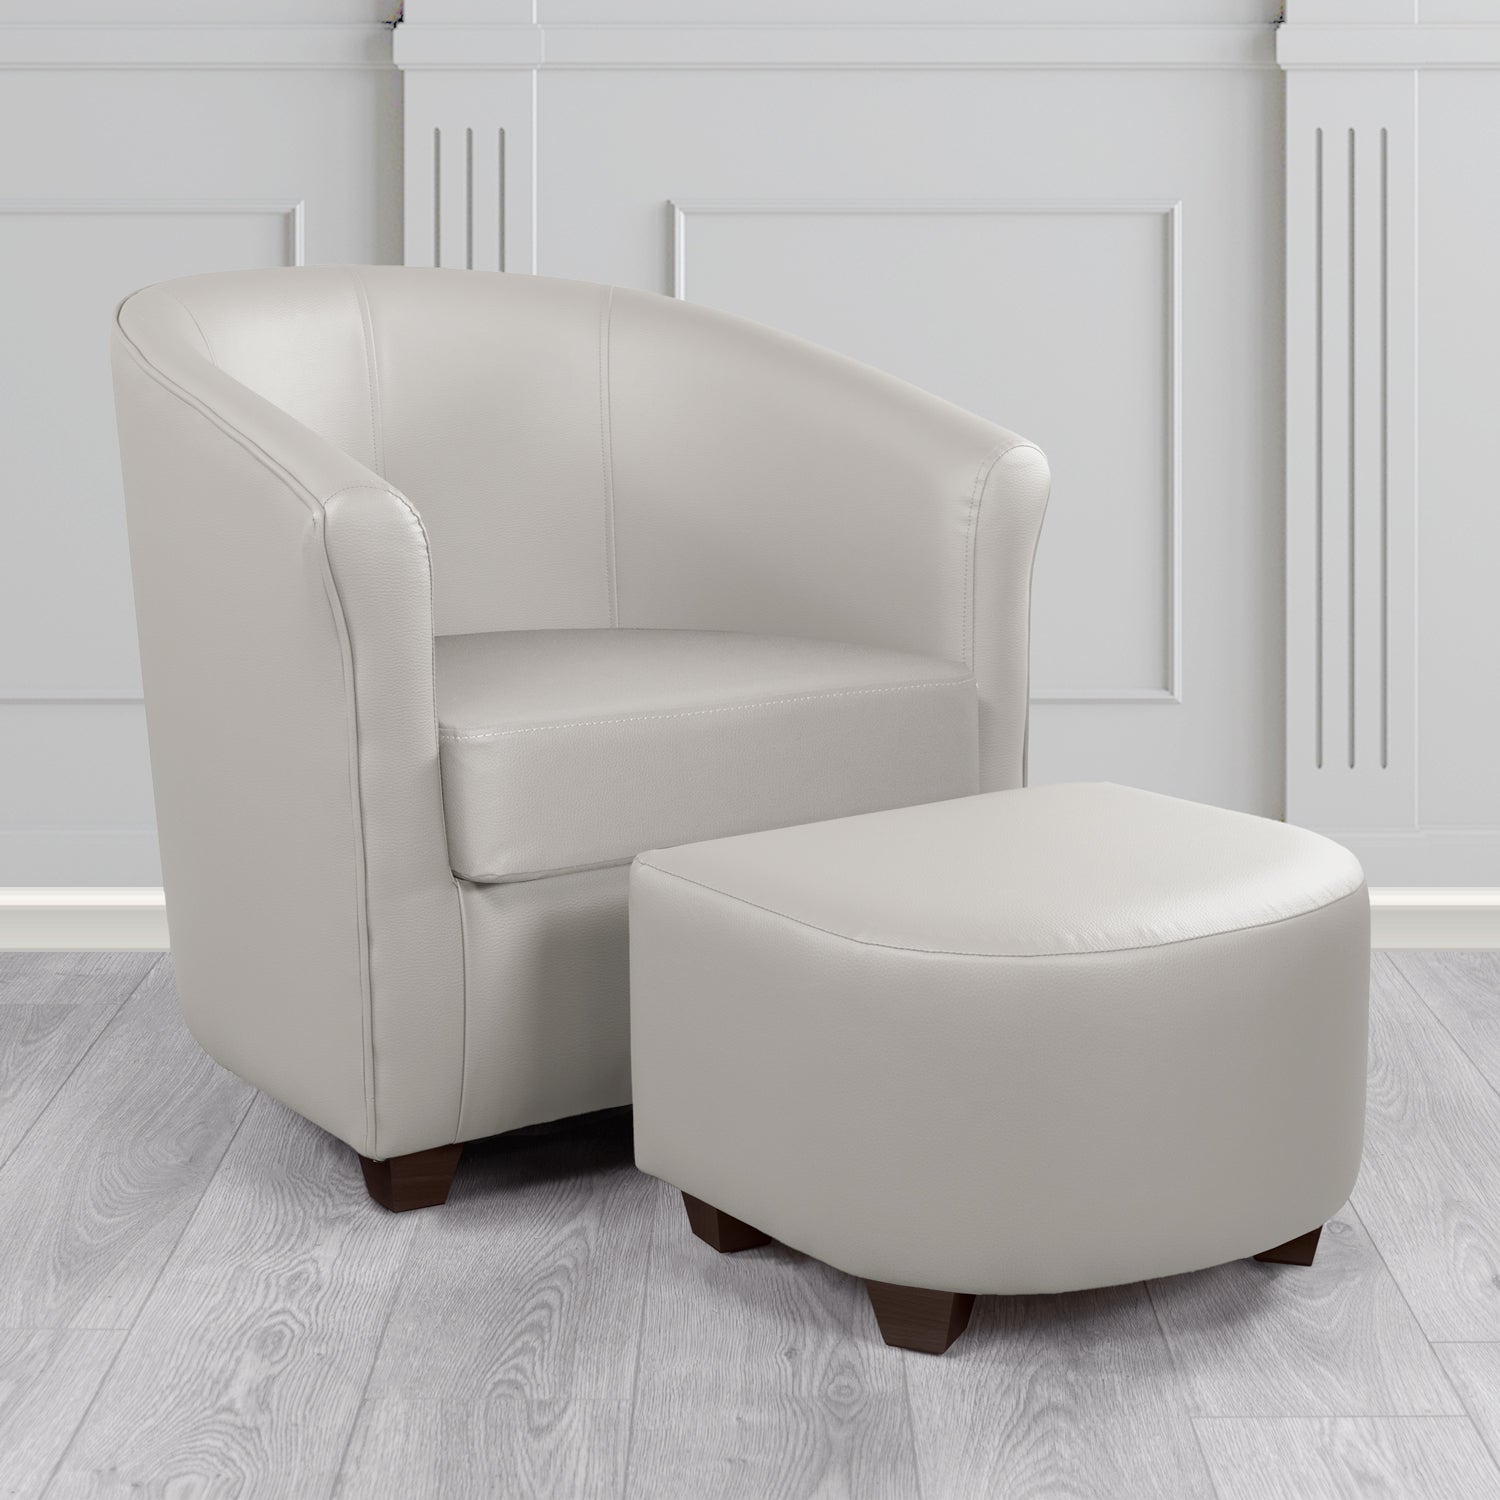 Cannes Tub Chair with Footstool Set in Just Colour Putty Crib 5 Faux Leather - The Tub Chair Shop